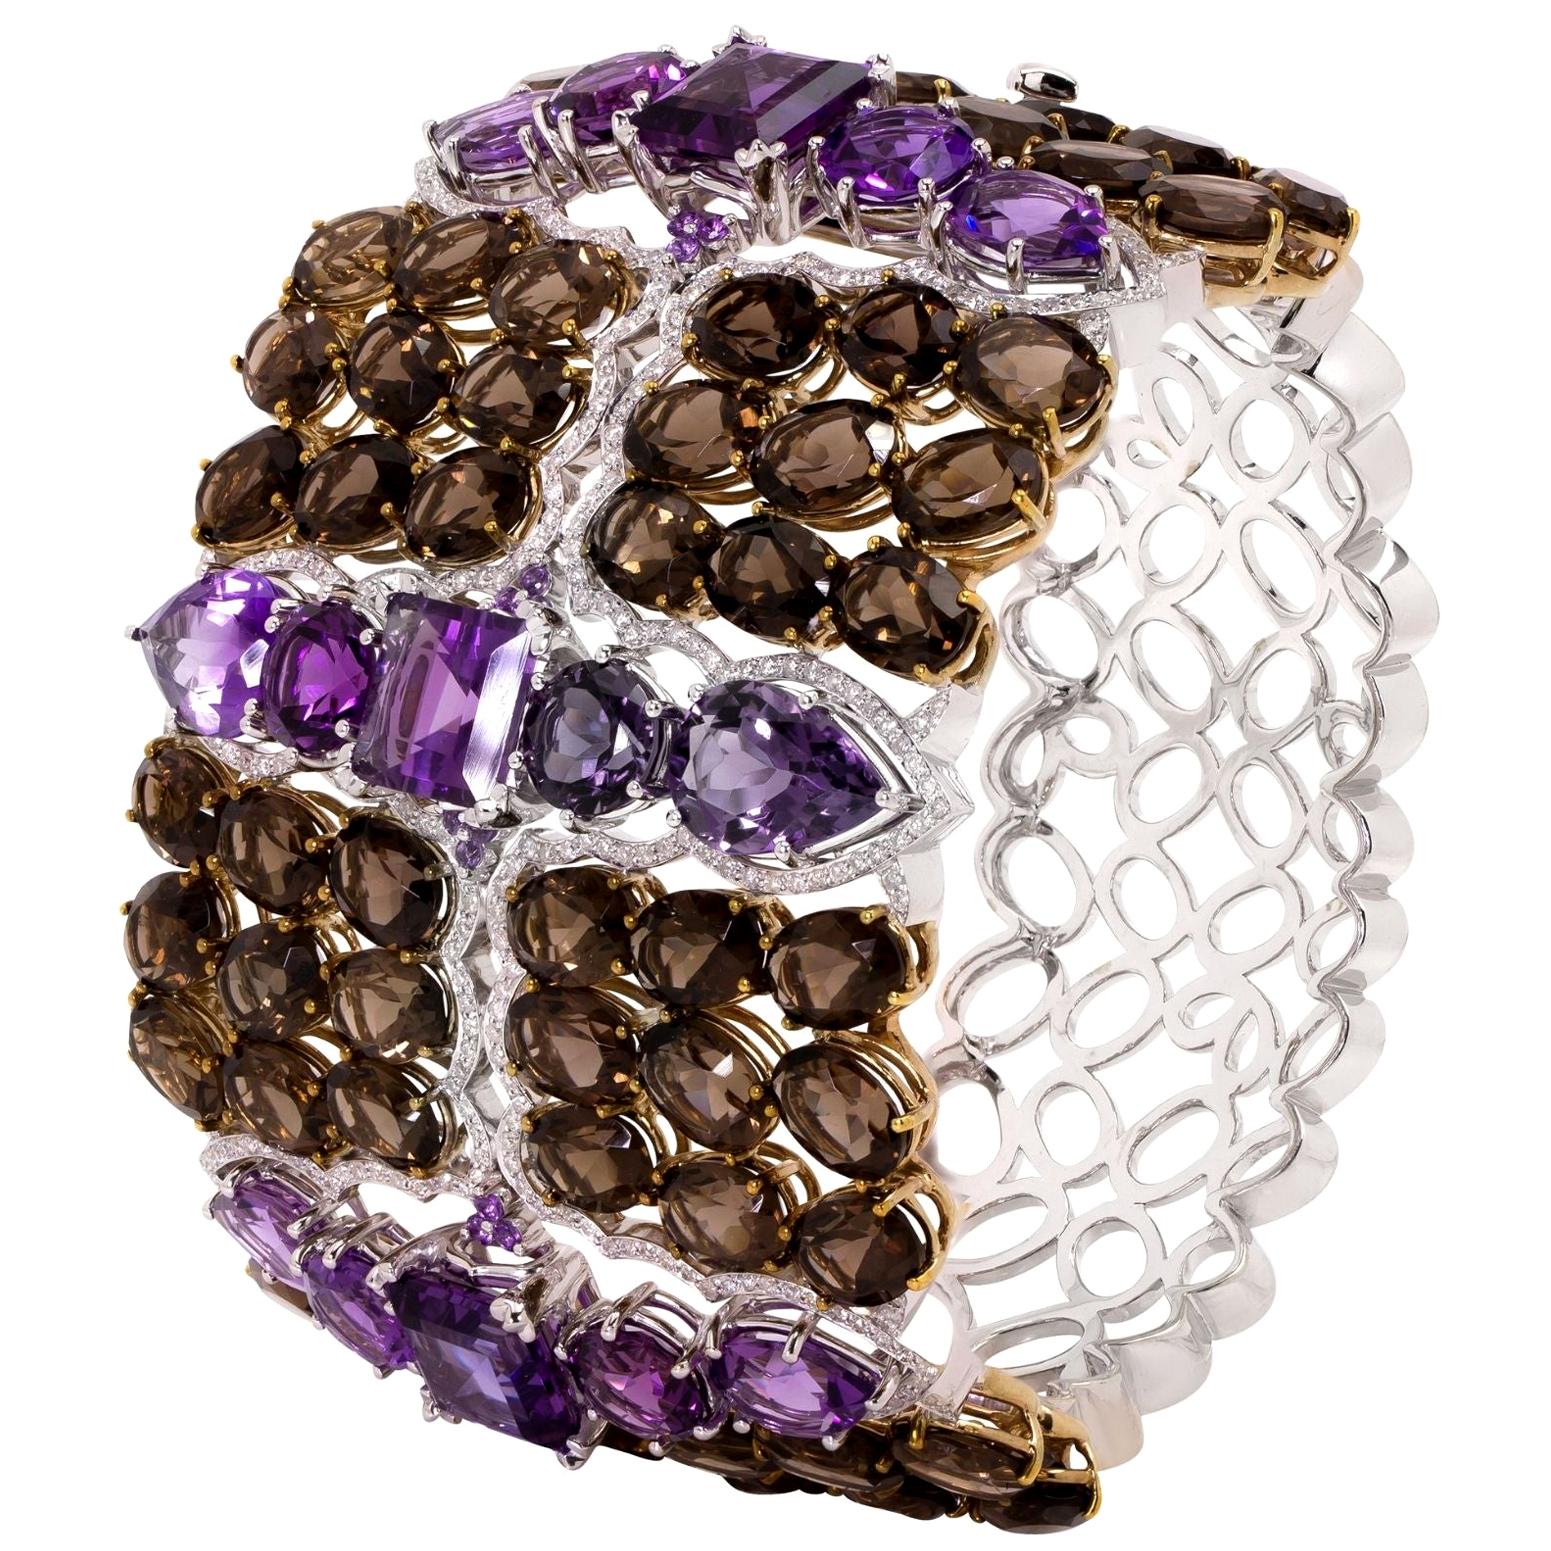 Mix Cut and Semi-Precious Stones Rhodium and Gold-Plated Bracelet For Sale